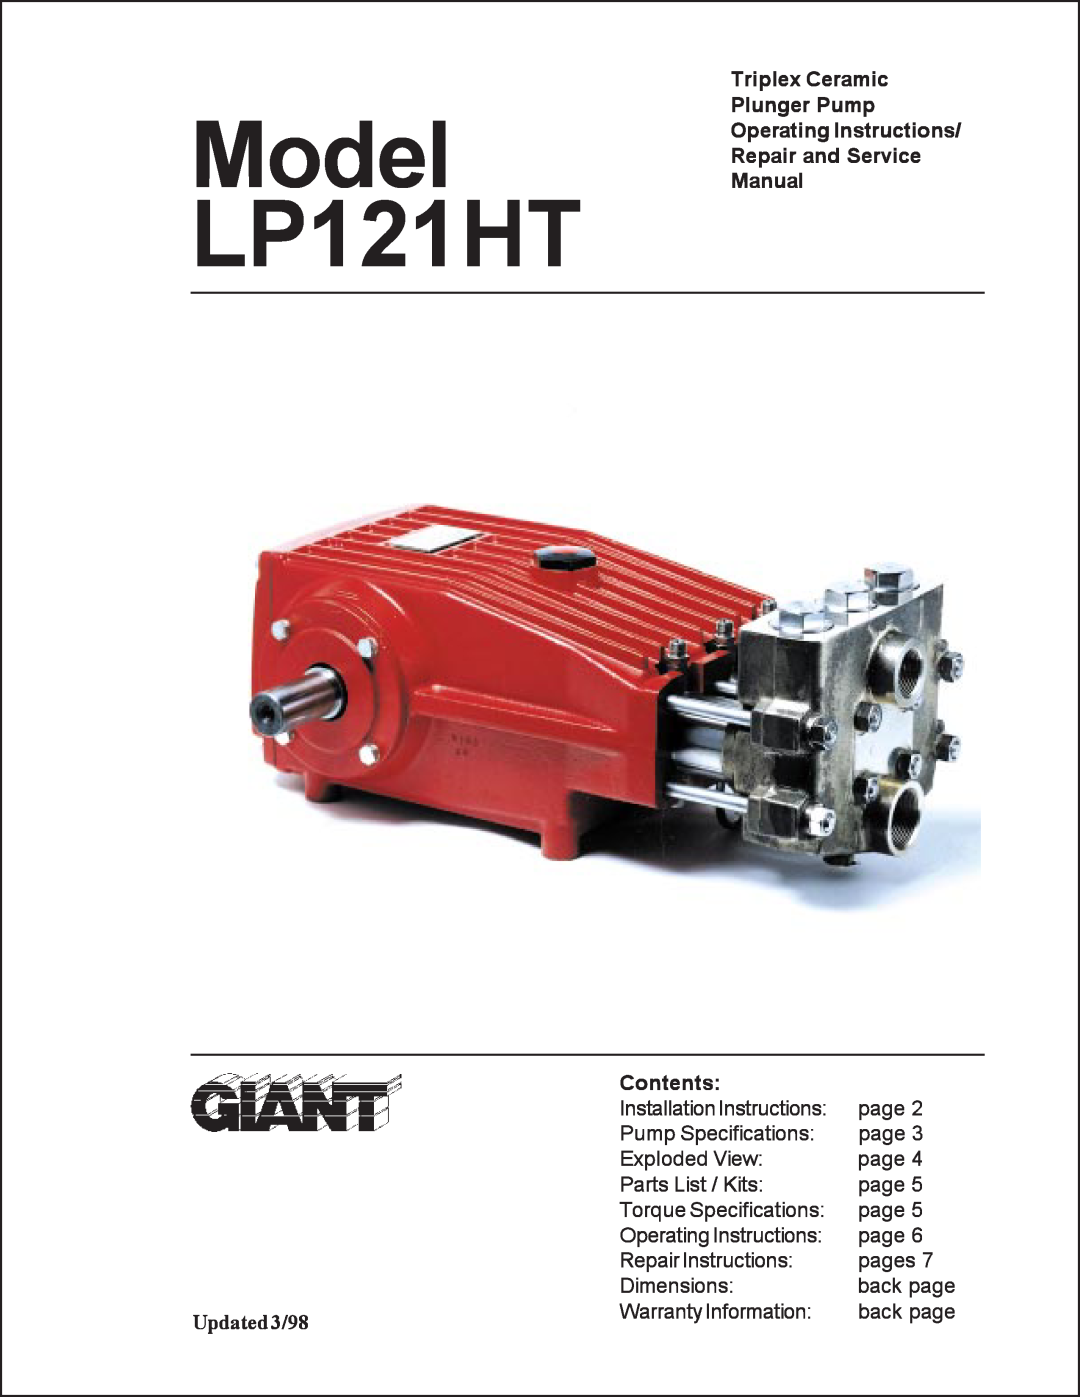 Giant installation instructions Model LP121HT, Triplex Ceramic Plunger Pump Operating Instructions, Contents 